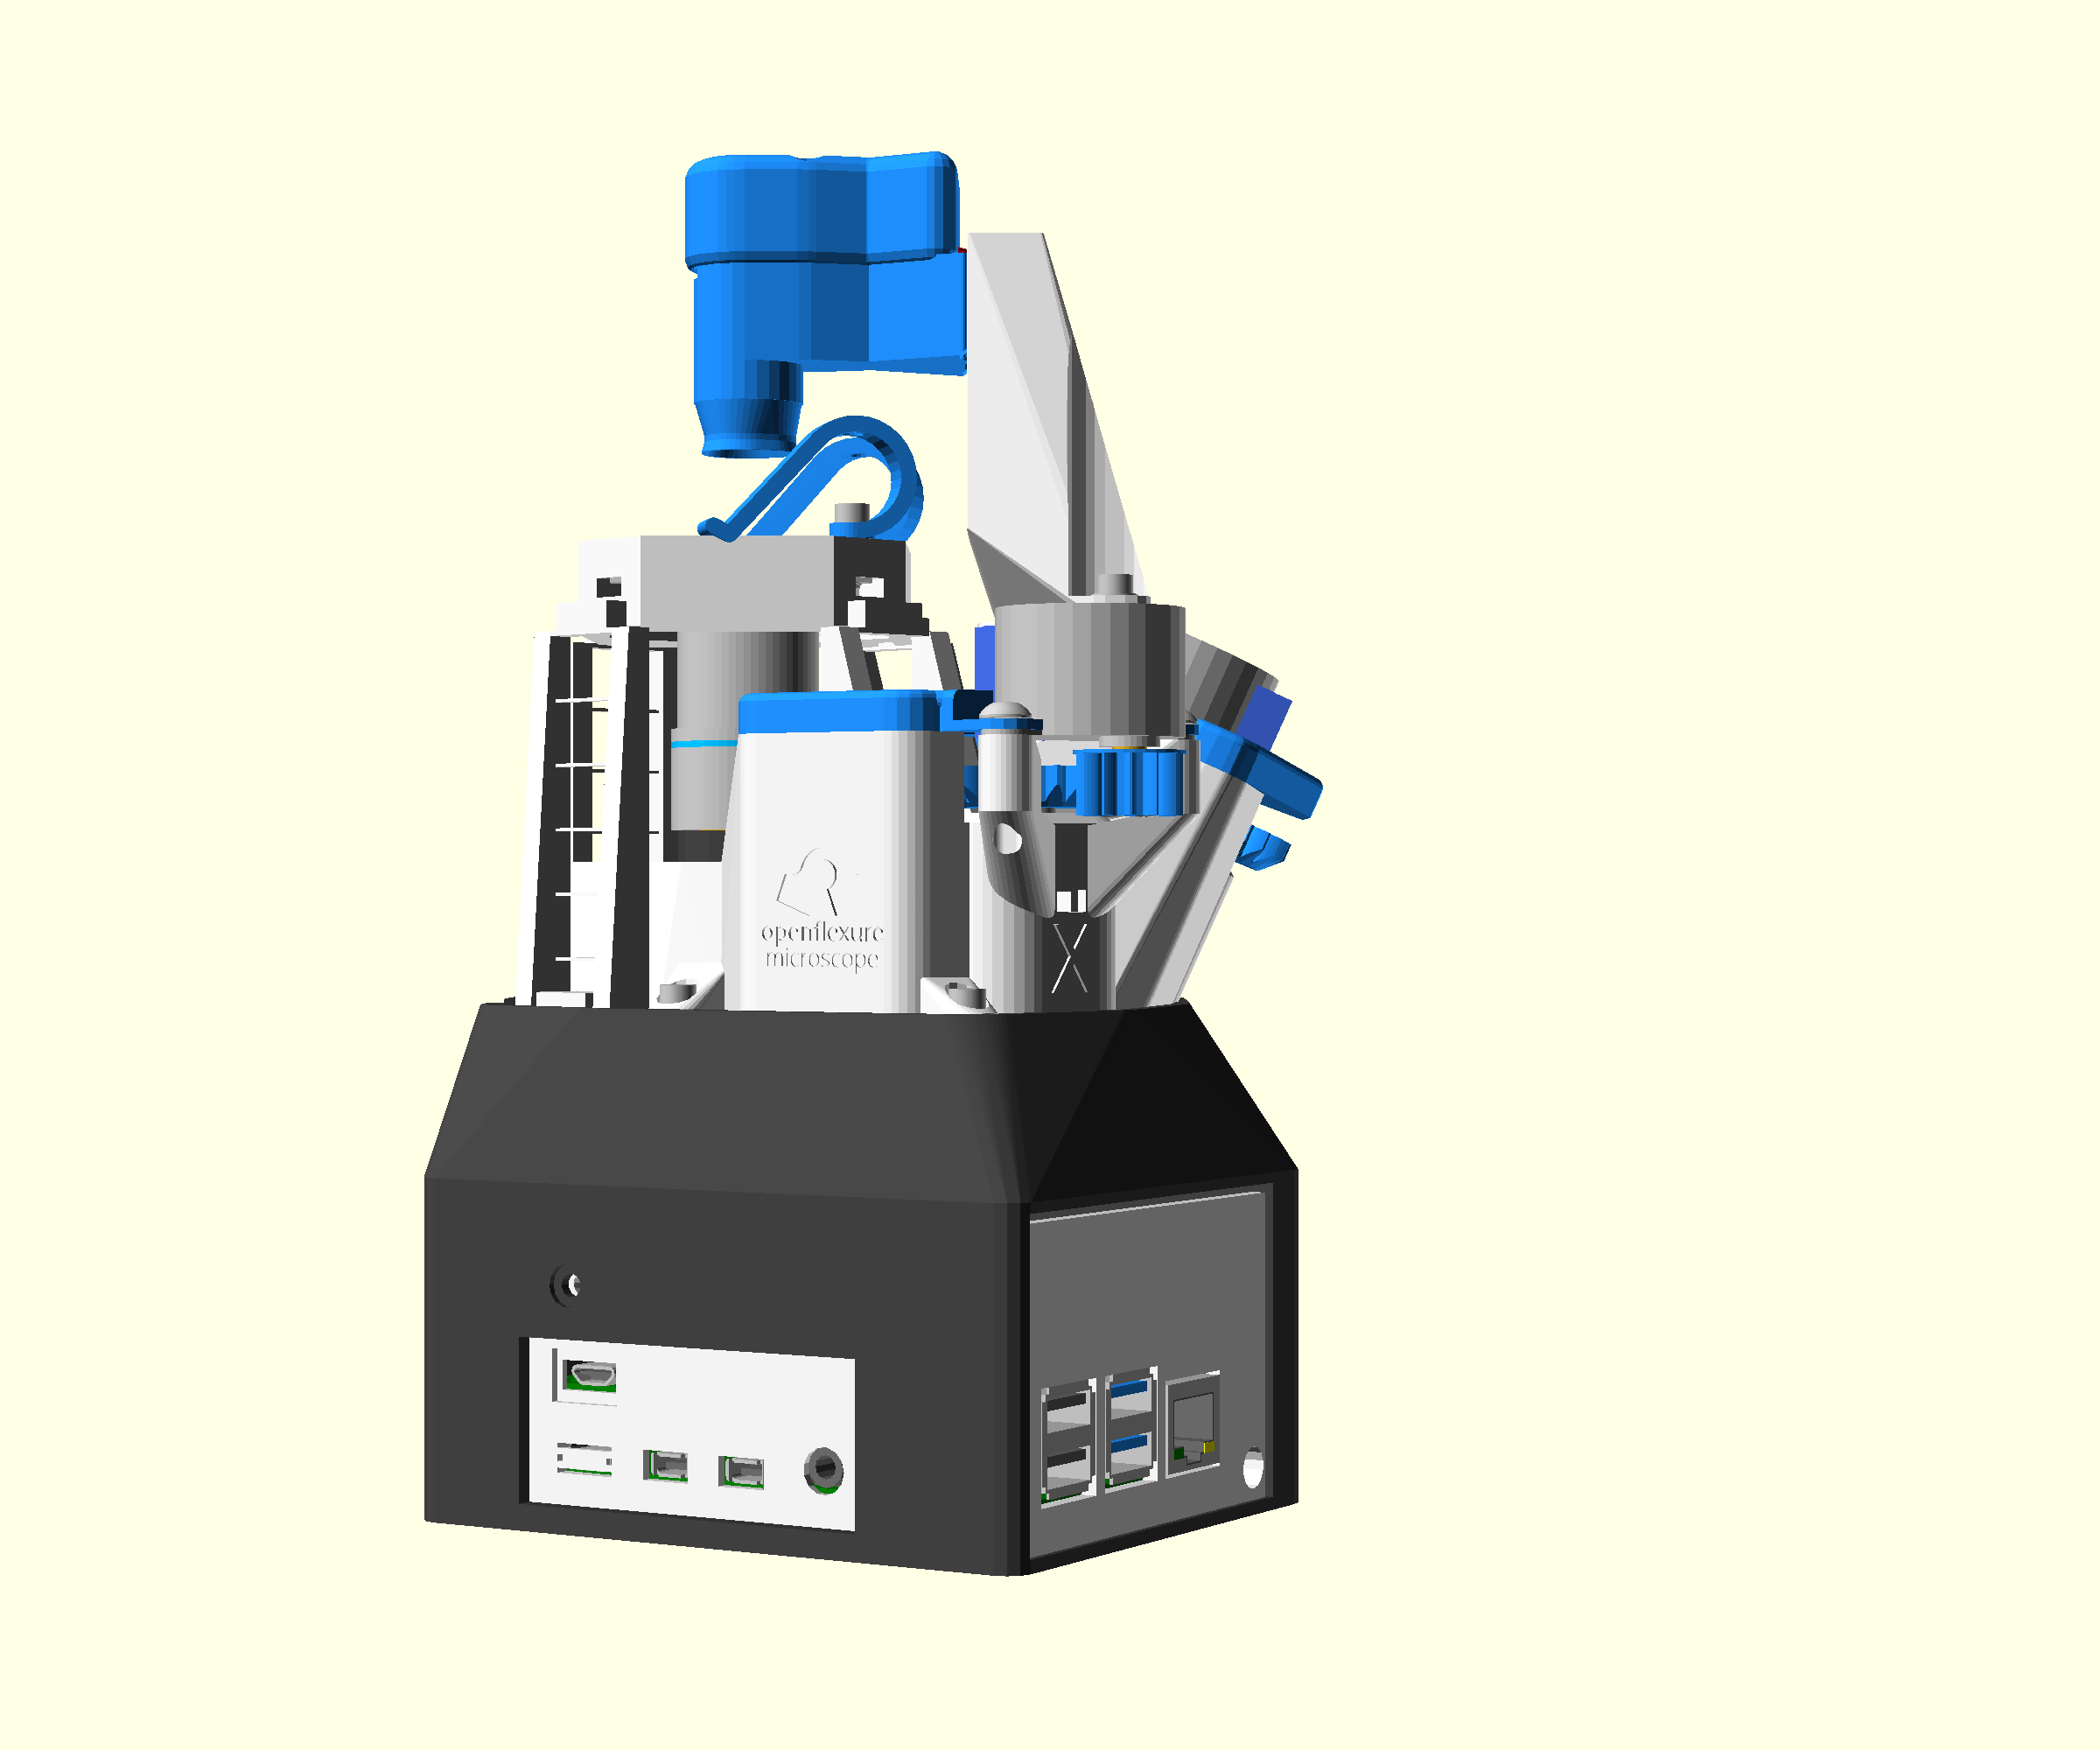 A render of the completed microscope